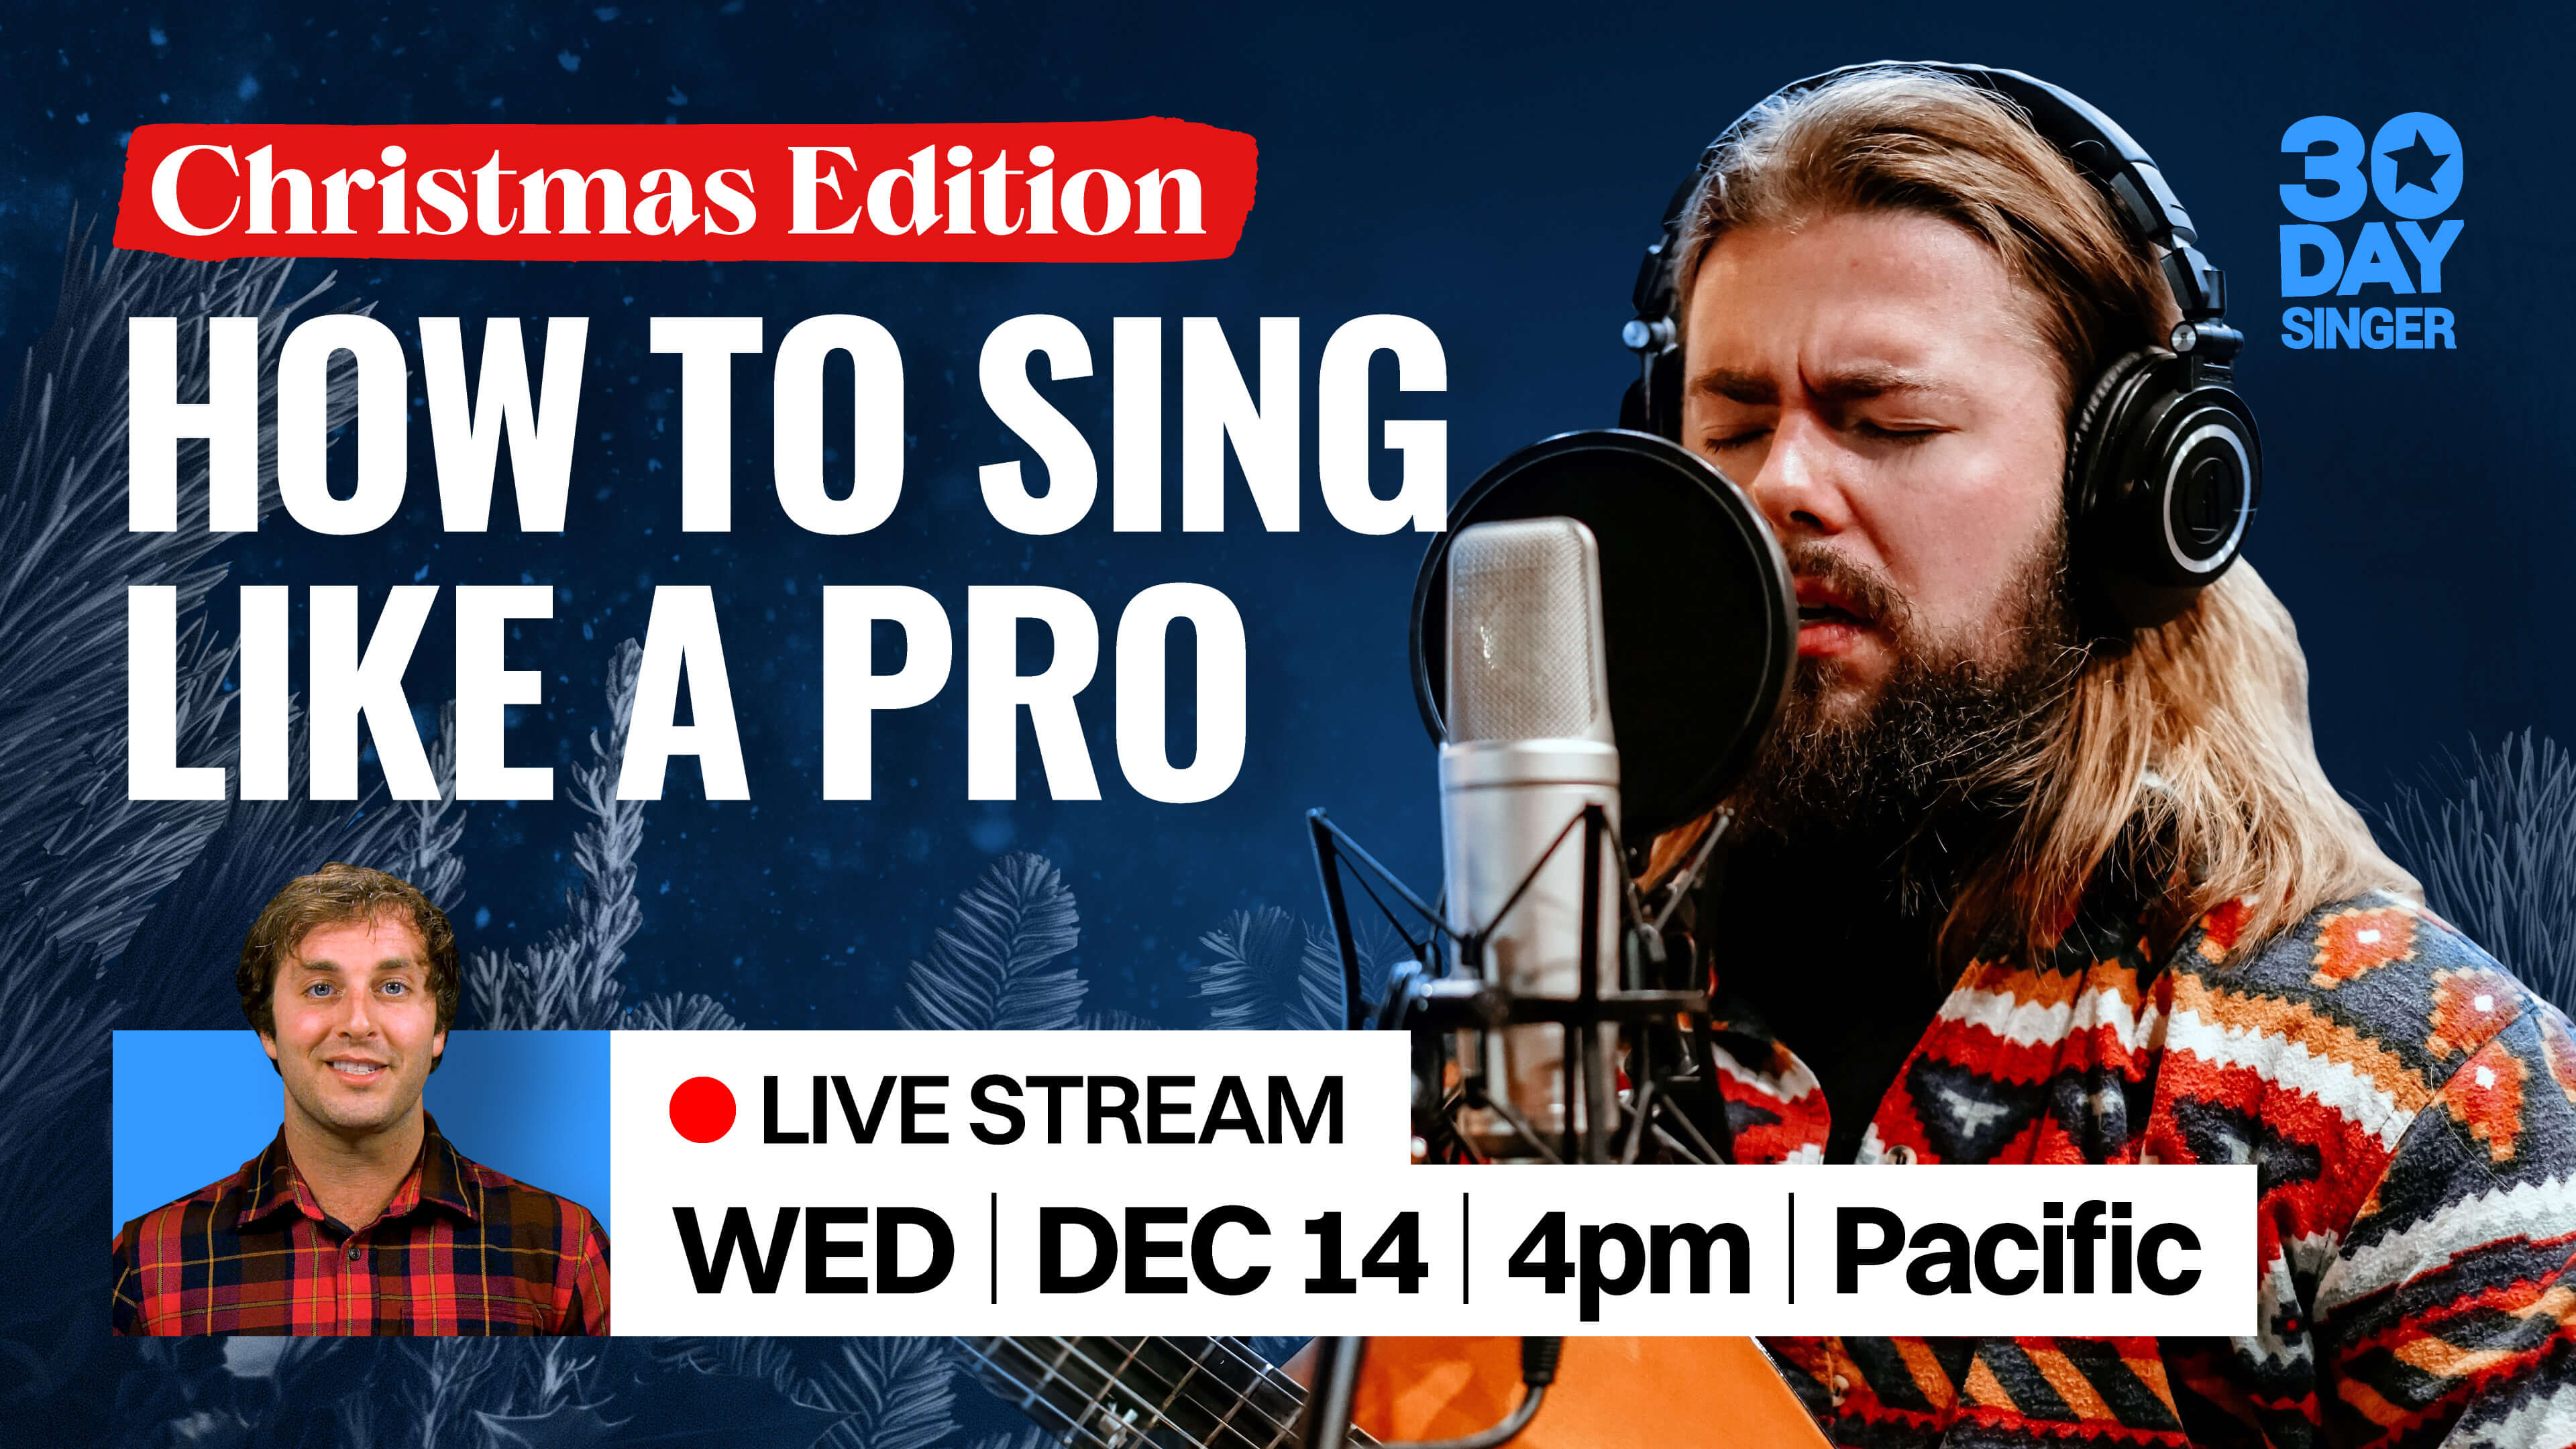 How To Sing Like A Pro - Christmas Edition!